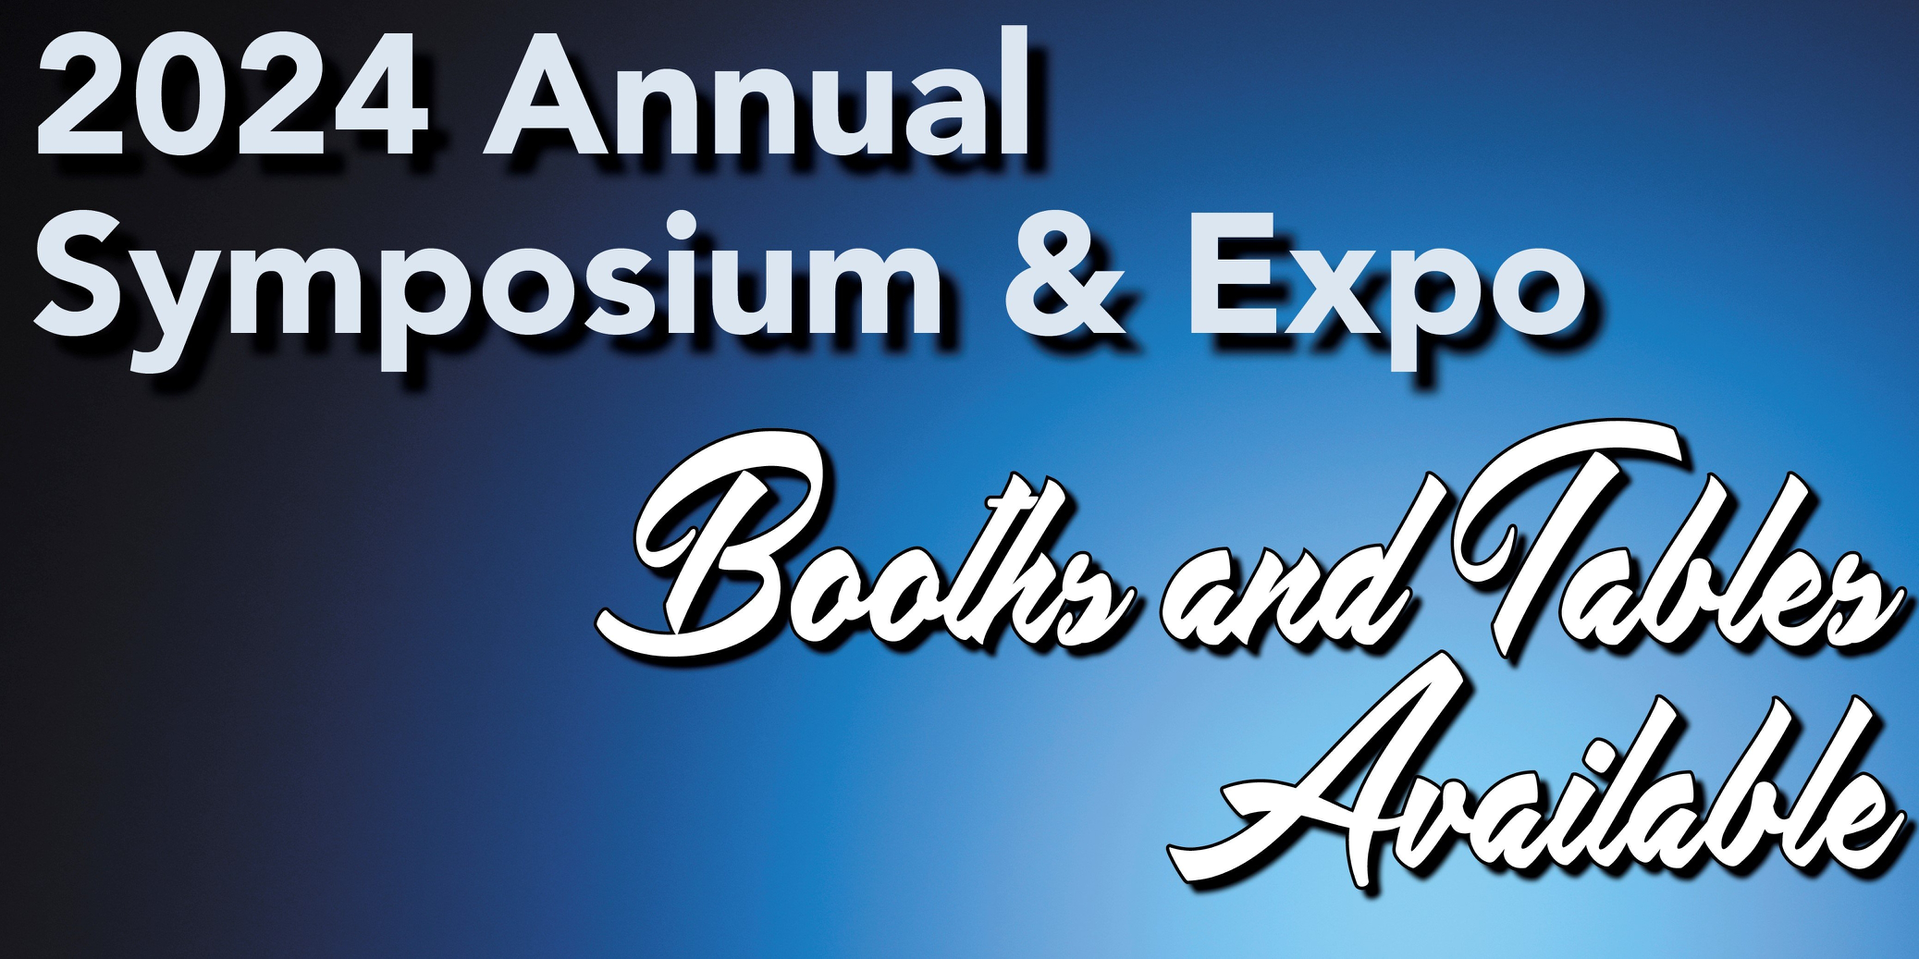 thumbnails 2024 Annual Symposium and Expo Exhibitors